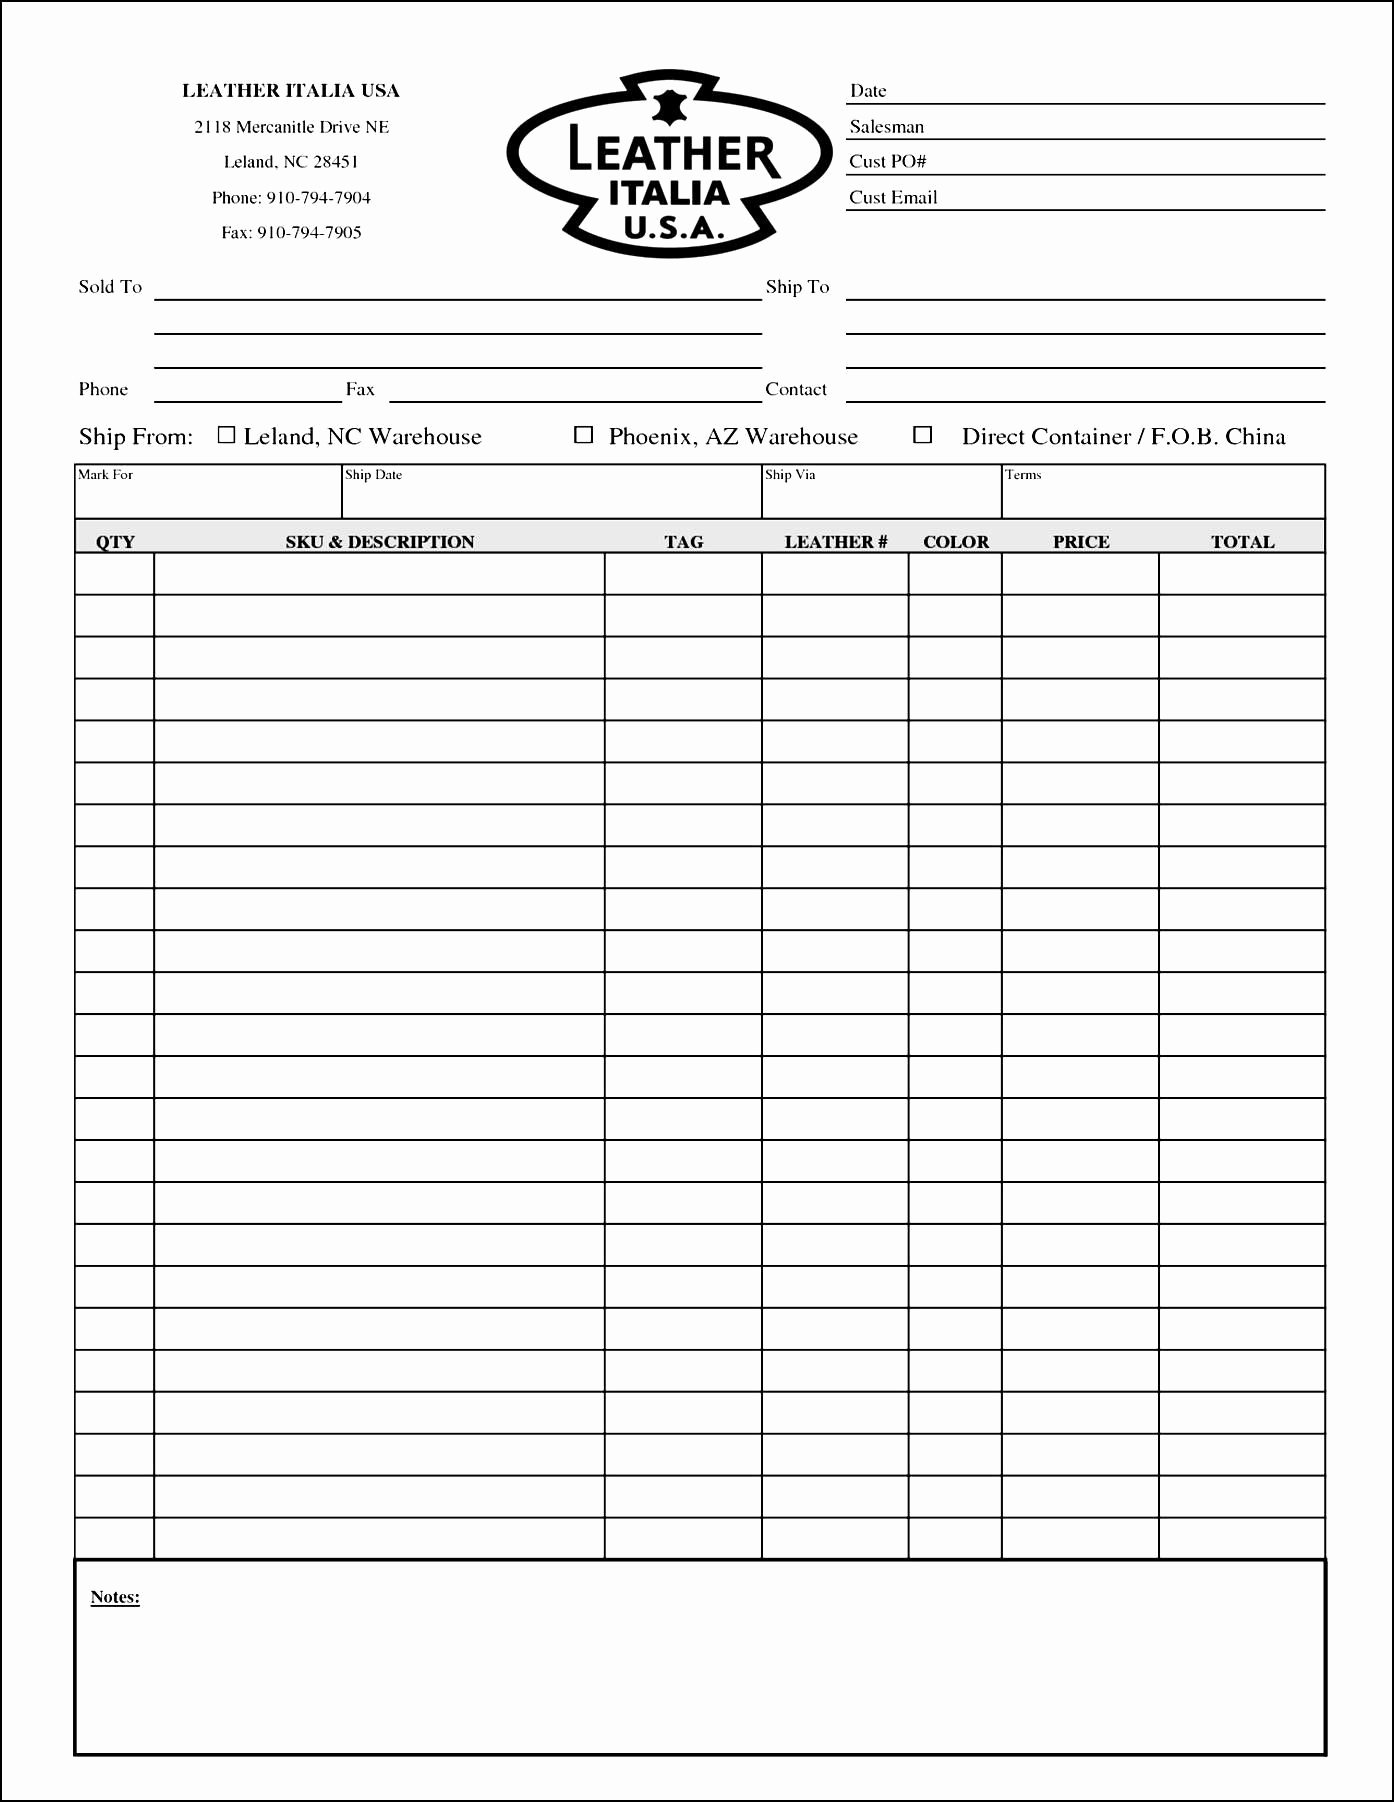 Sample order form Template Beautiful Blank order form Template Excel